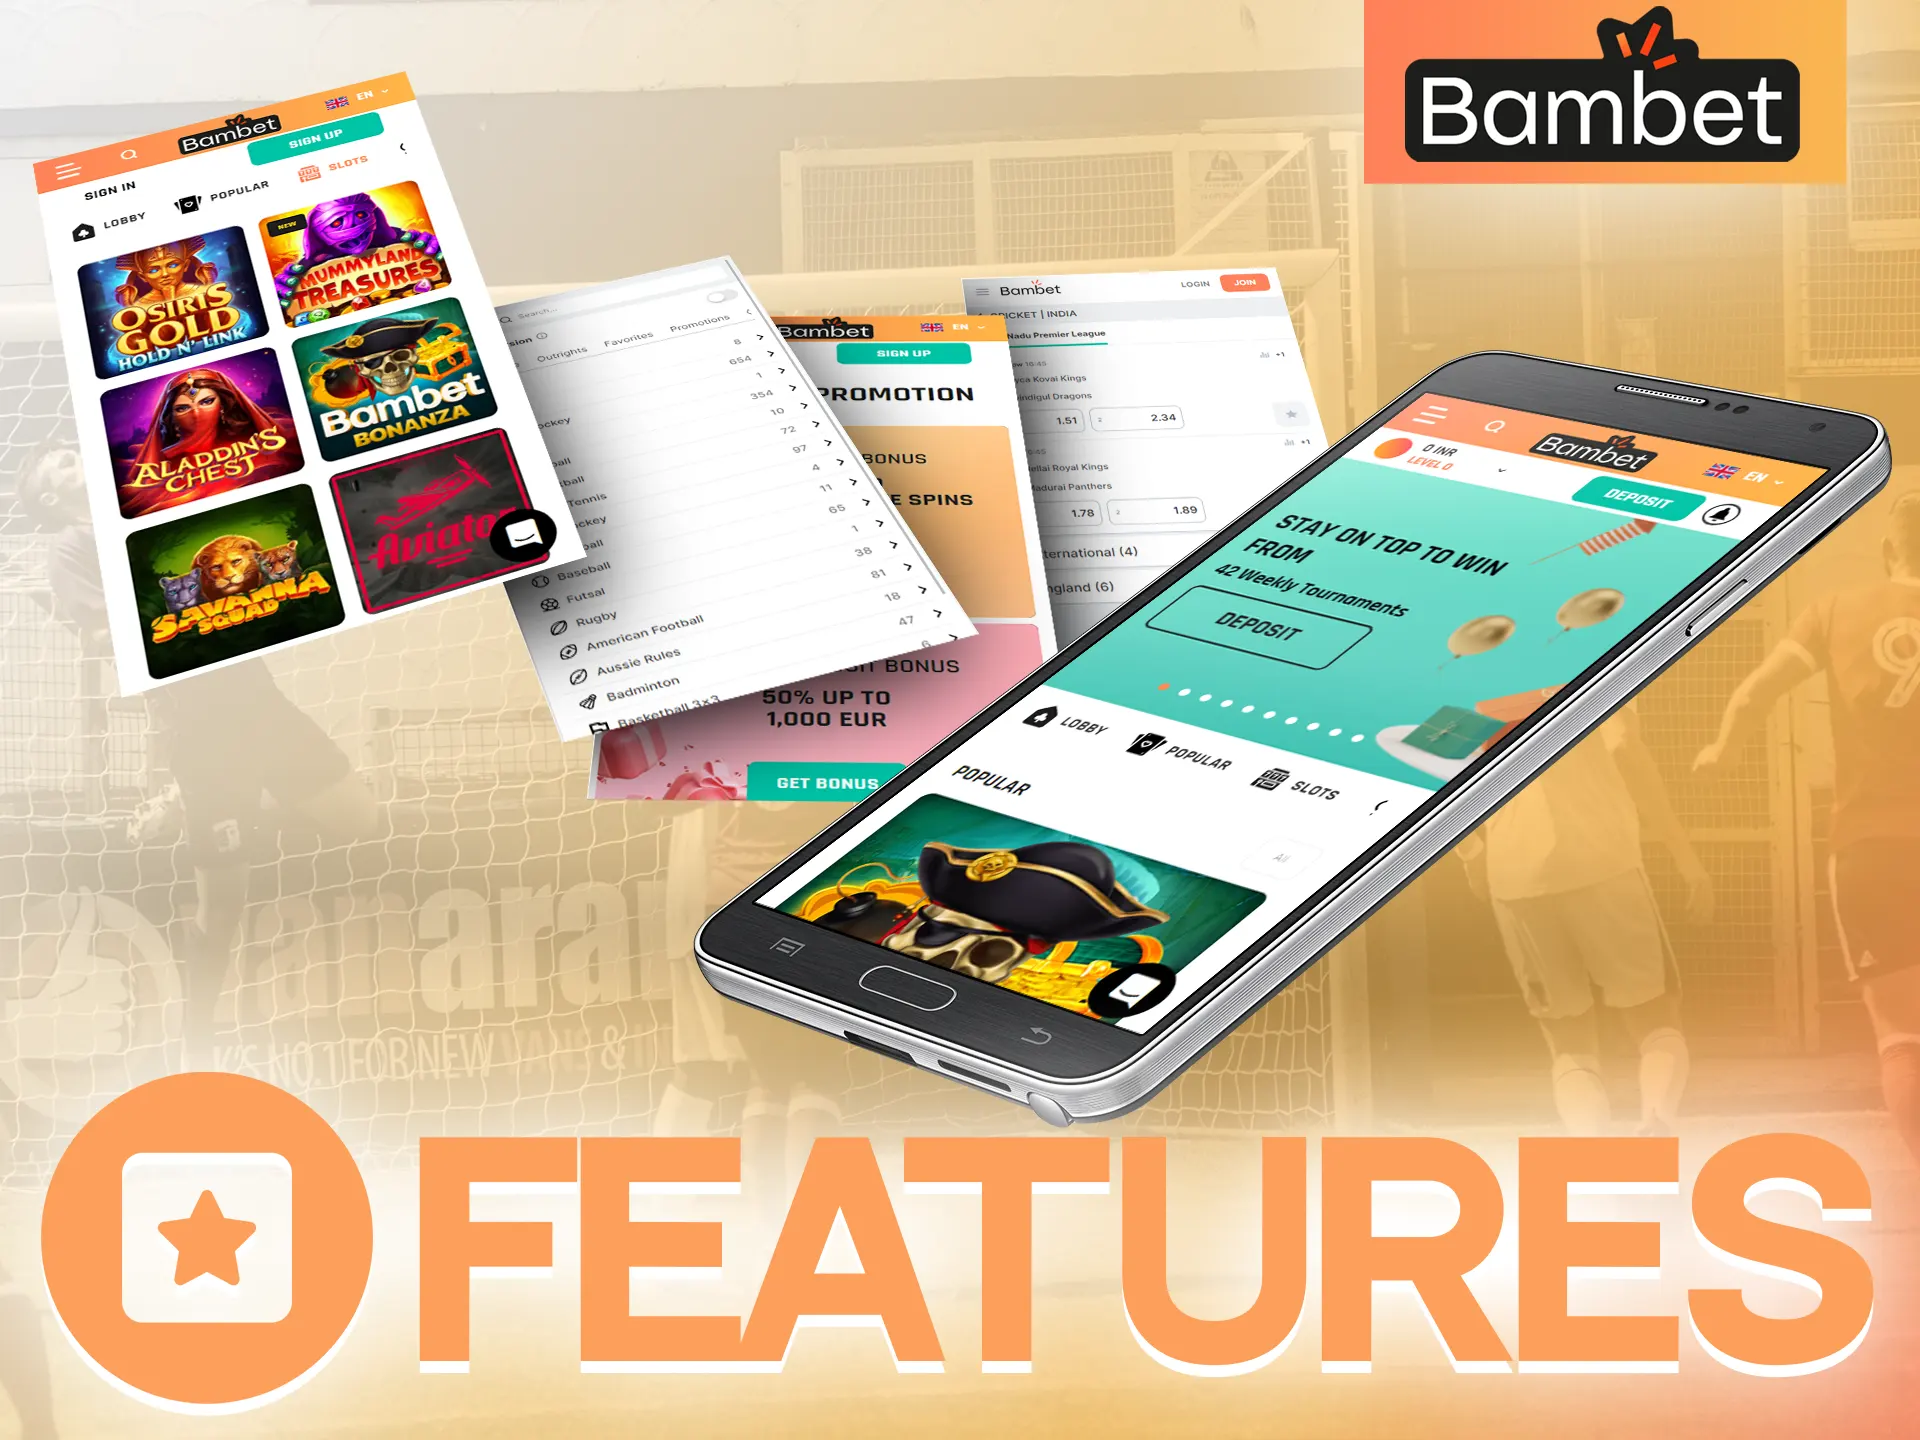 The Bambet app has many handy and useful features.